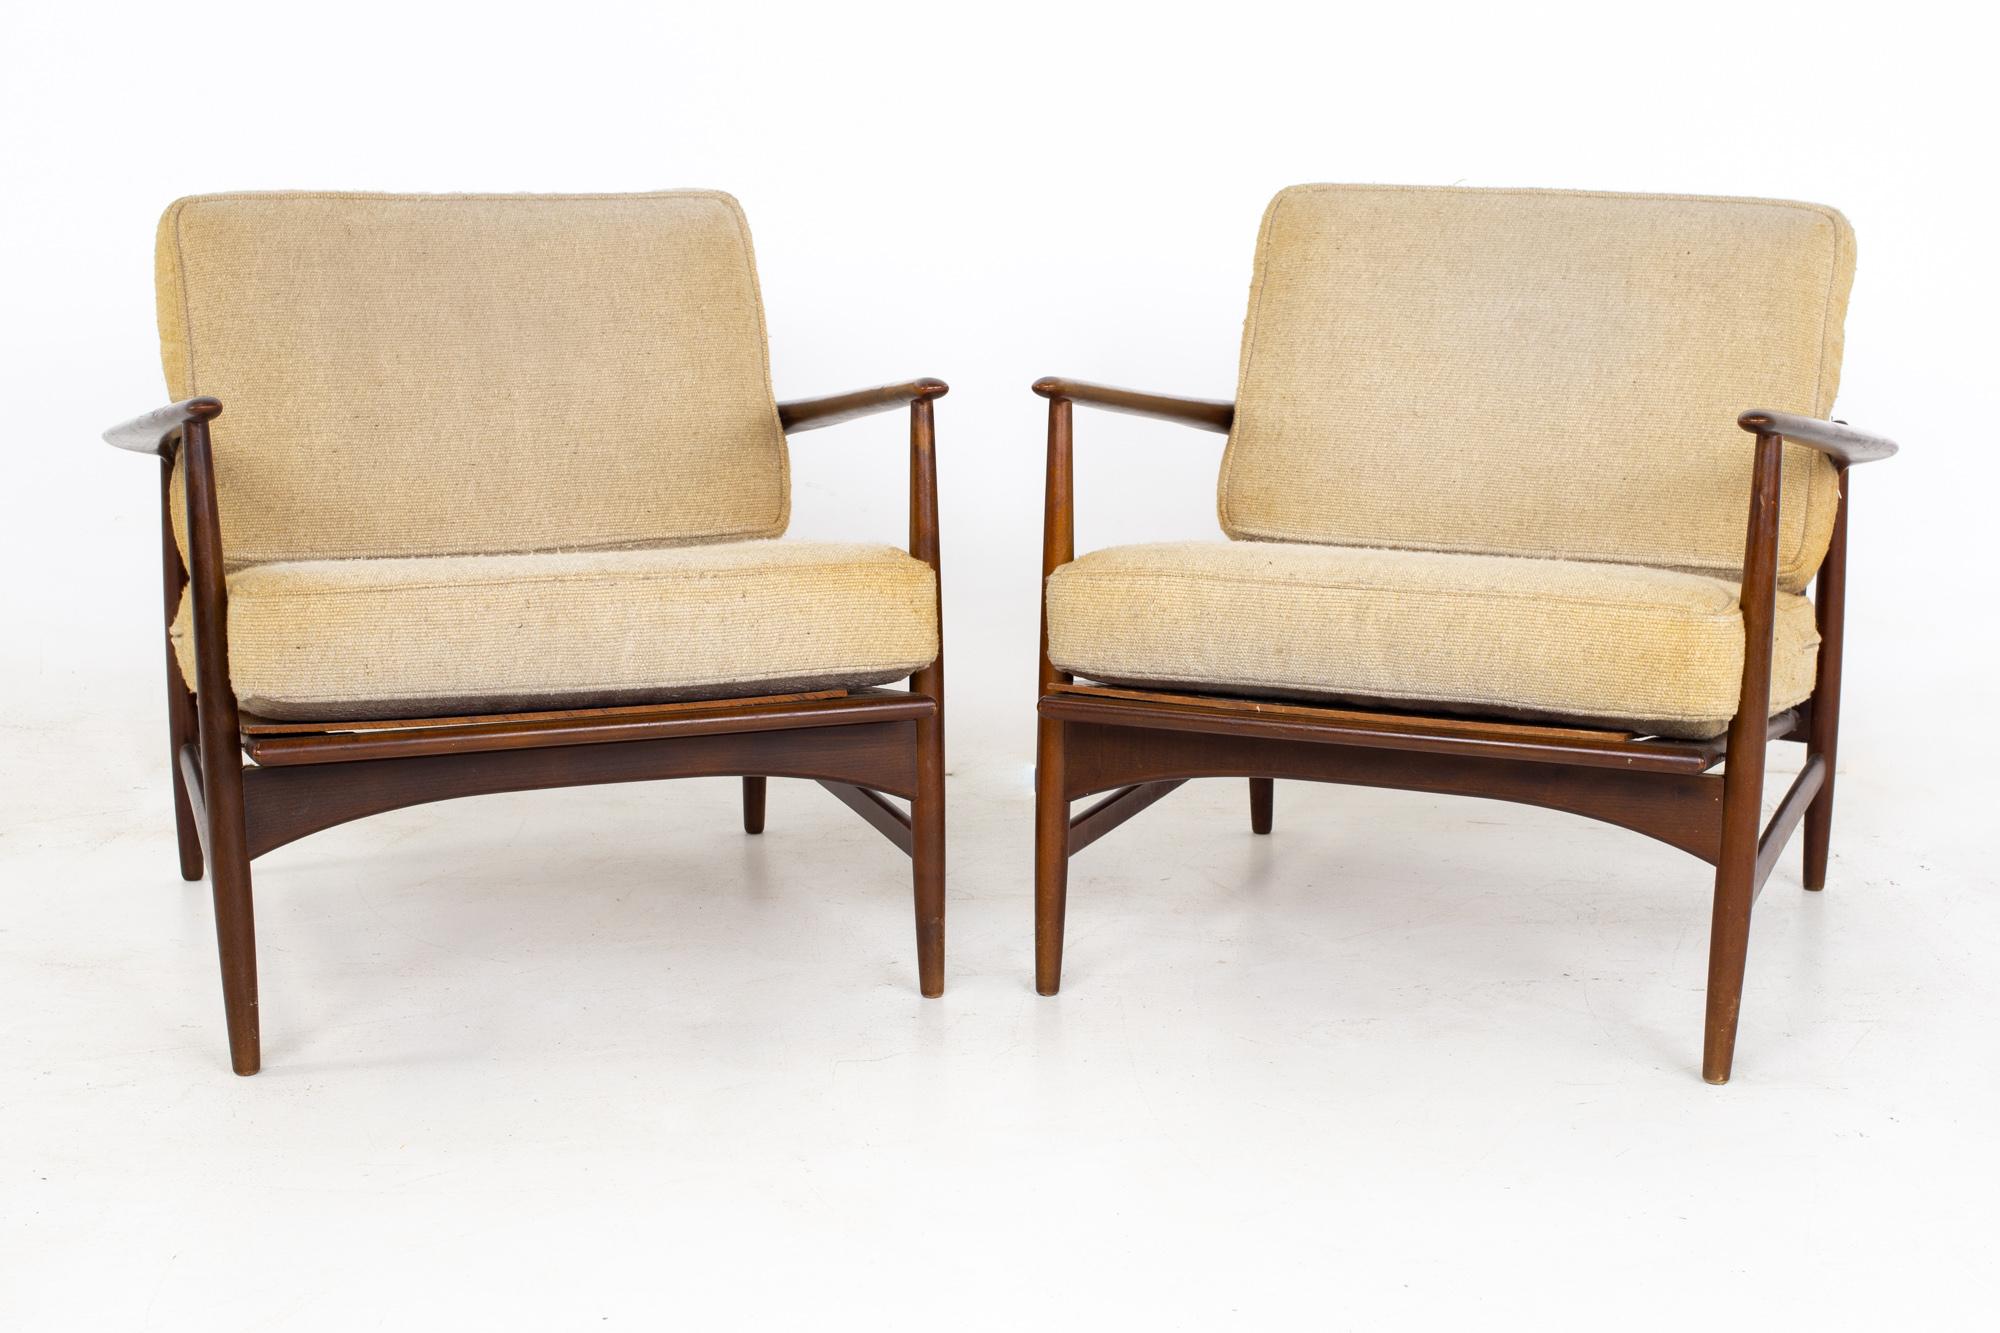 Kofod Larsen for Selig mid century lounge chairs - A pair

Each chair measures: 30 wide x 30 deep x 28.5 high, with a seat height of 16 inches and an arm height of 22 inches

All pieces of furniture can be had in what we call restored vintage